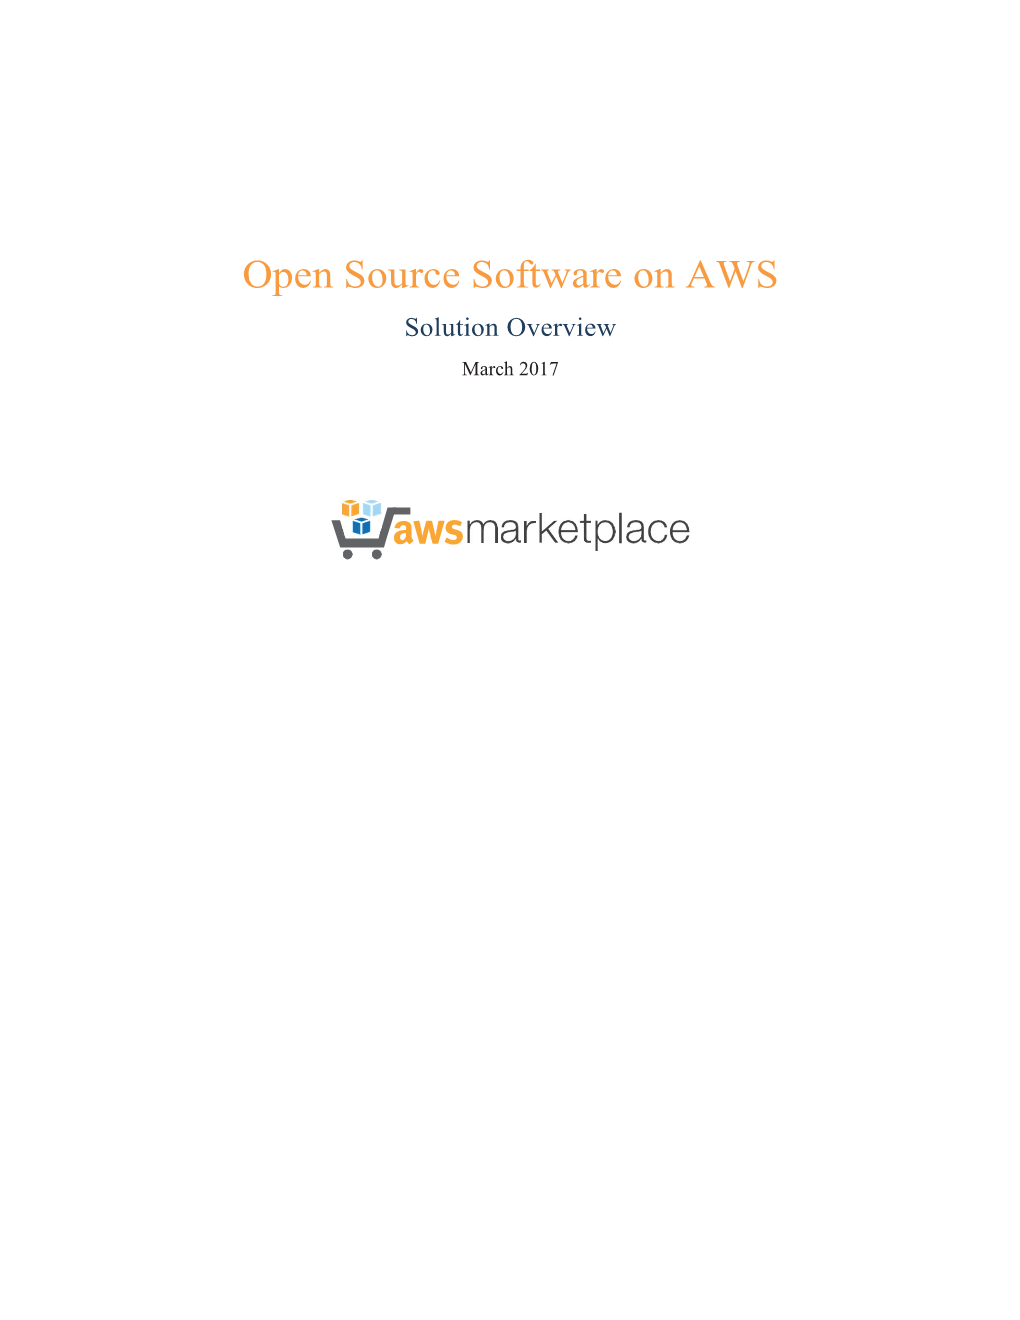 Open Source Software on AWS Solution Overview March 2017